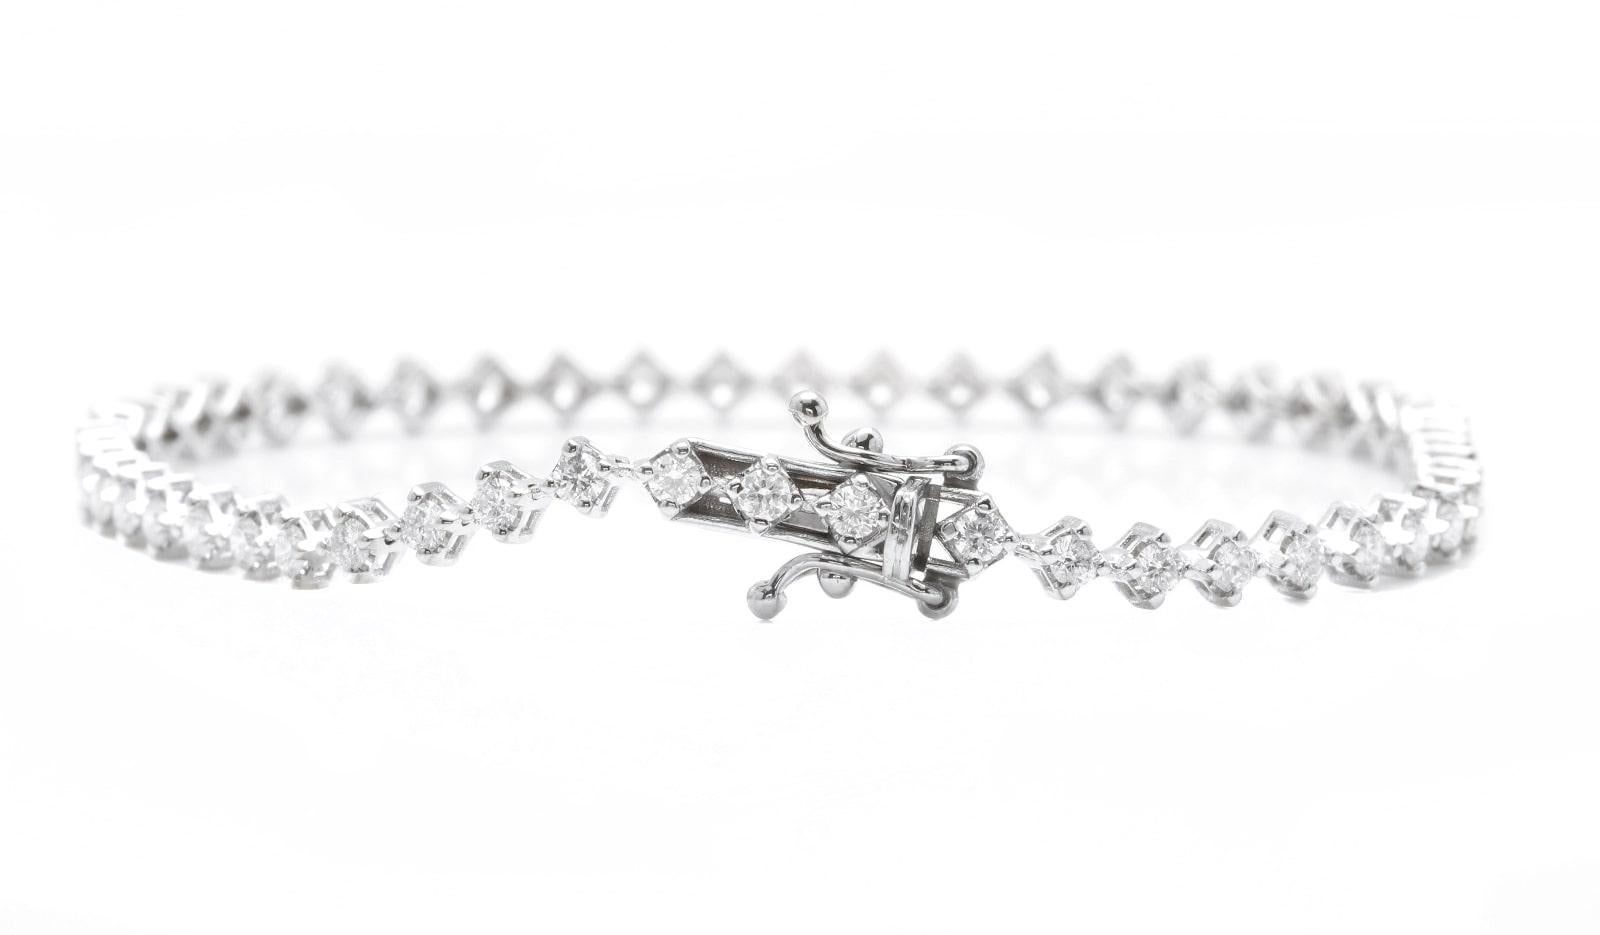 1.80 Carats Stunning Natural Diamond 14K Solid White Gold Bracelet 

Suggested Replacement Value: Approx. $5,500.00

STAMPED: 14K

Total Natural Round Diamonds Weight: Approx. 1.80 Carats (color G-H / Clarity SI1-SI2)

Bangle Wrist Size is:  7